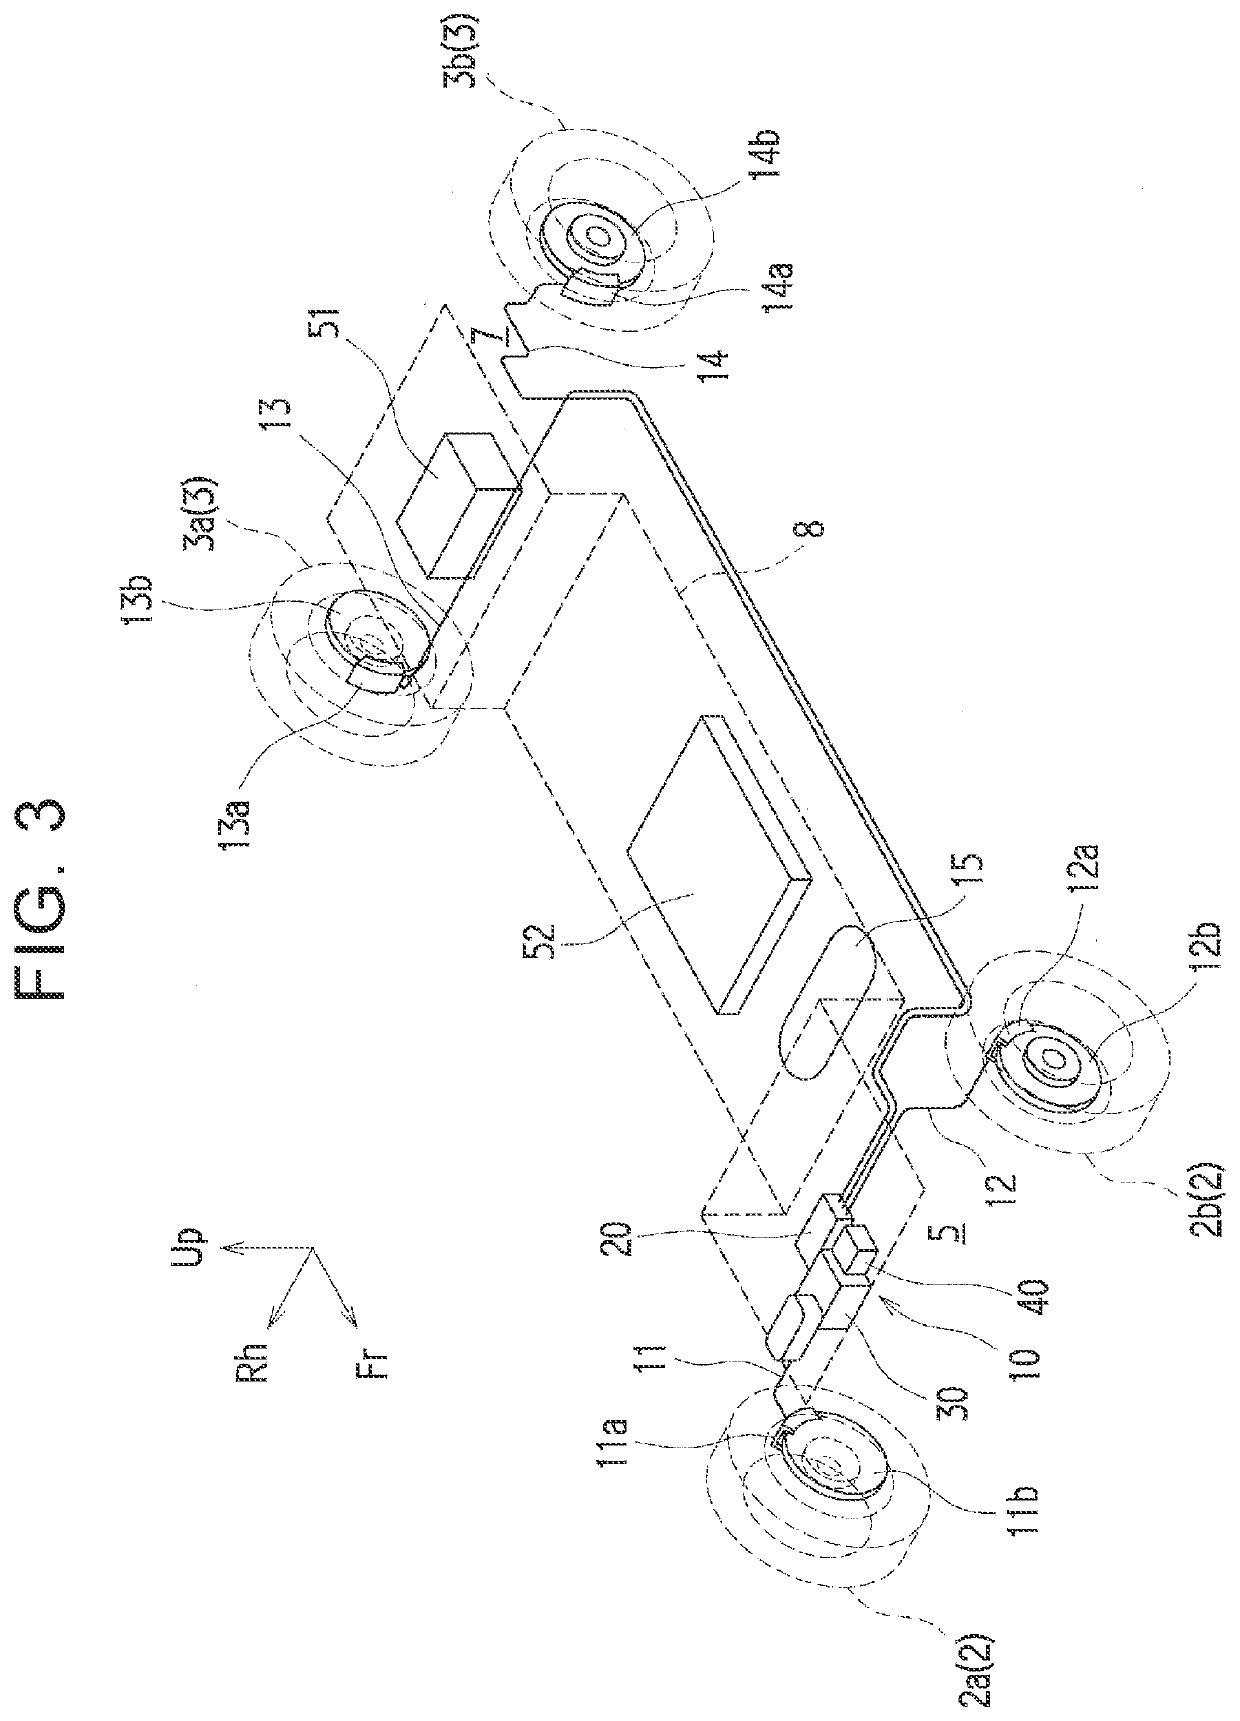 Support structure for brake fluid pressure generation device